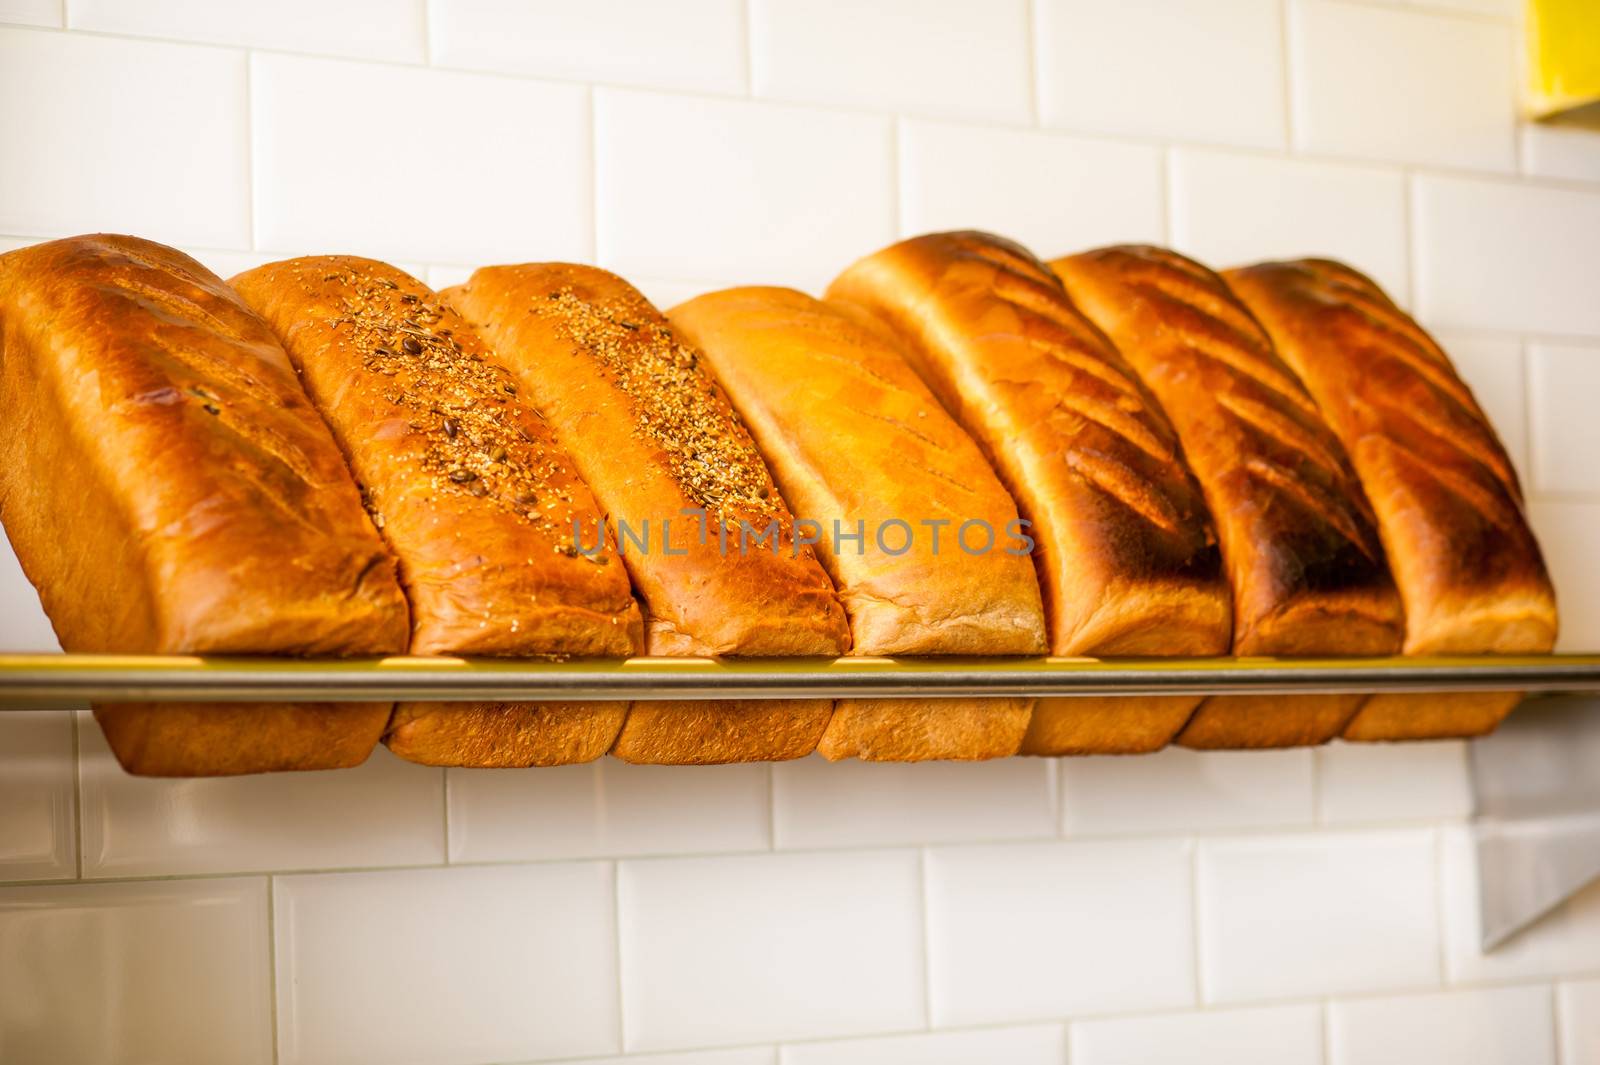 Freshly kneaded grain and white breads for sale by stockyimages